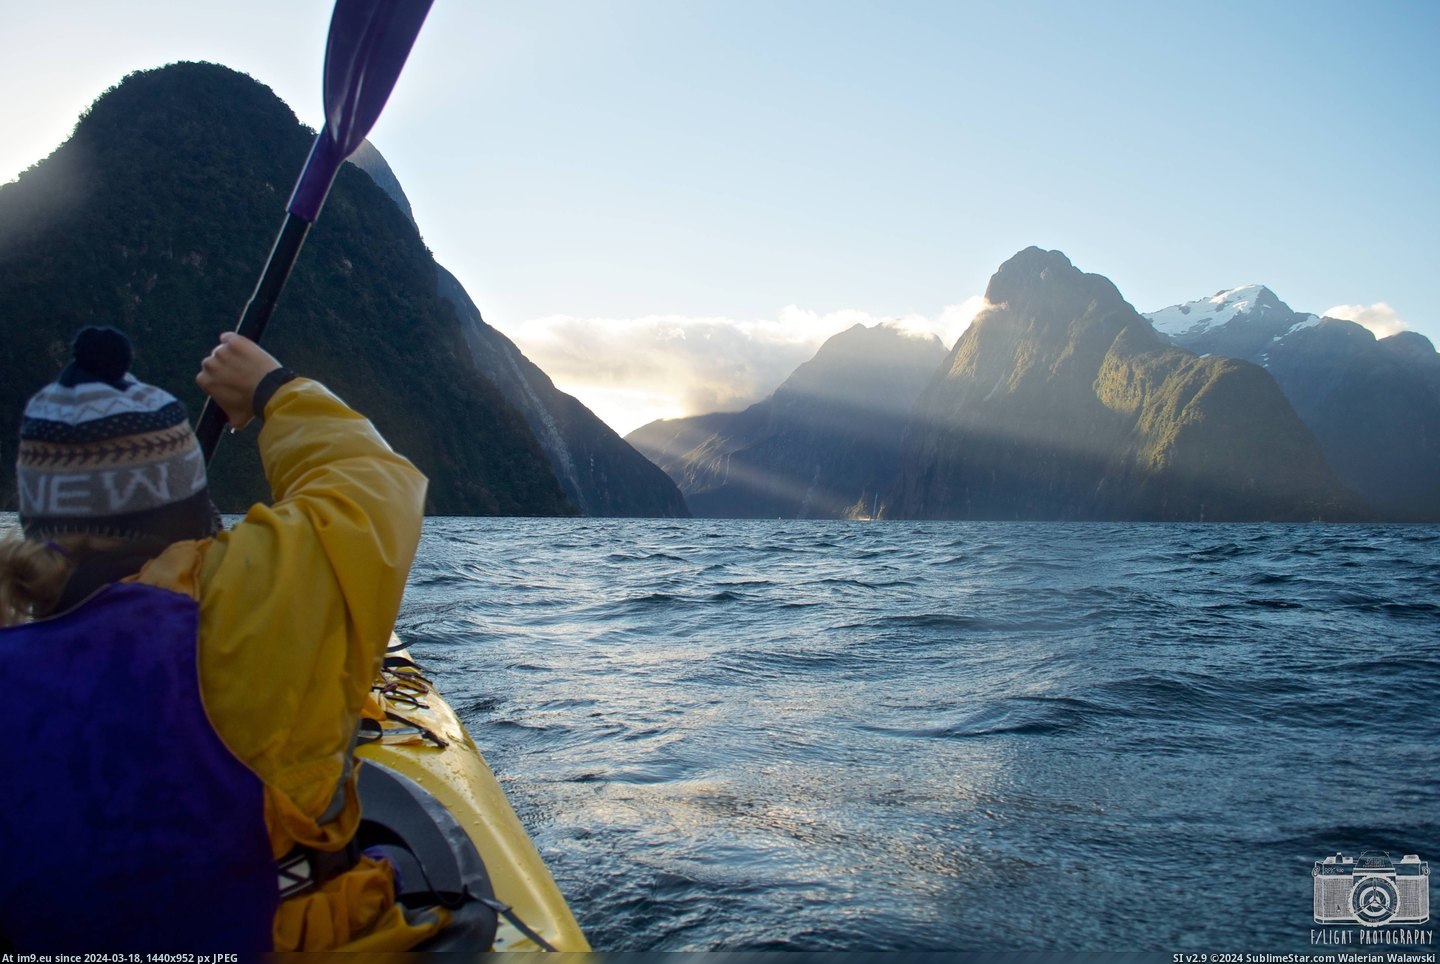 #Park #National #Zealand #Milford #Kayaking #Sound #4288x2848 #Fiordland [Earthporn] Kayaking the Milford Sound, Fiordland National Park, New Zealand [4288x2848] [OC] Pic. (Obraz z album My r/EARTHPORN favs))